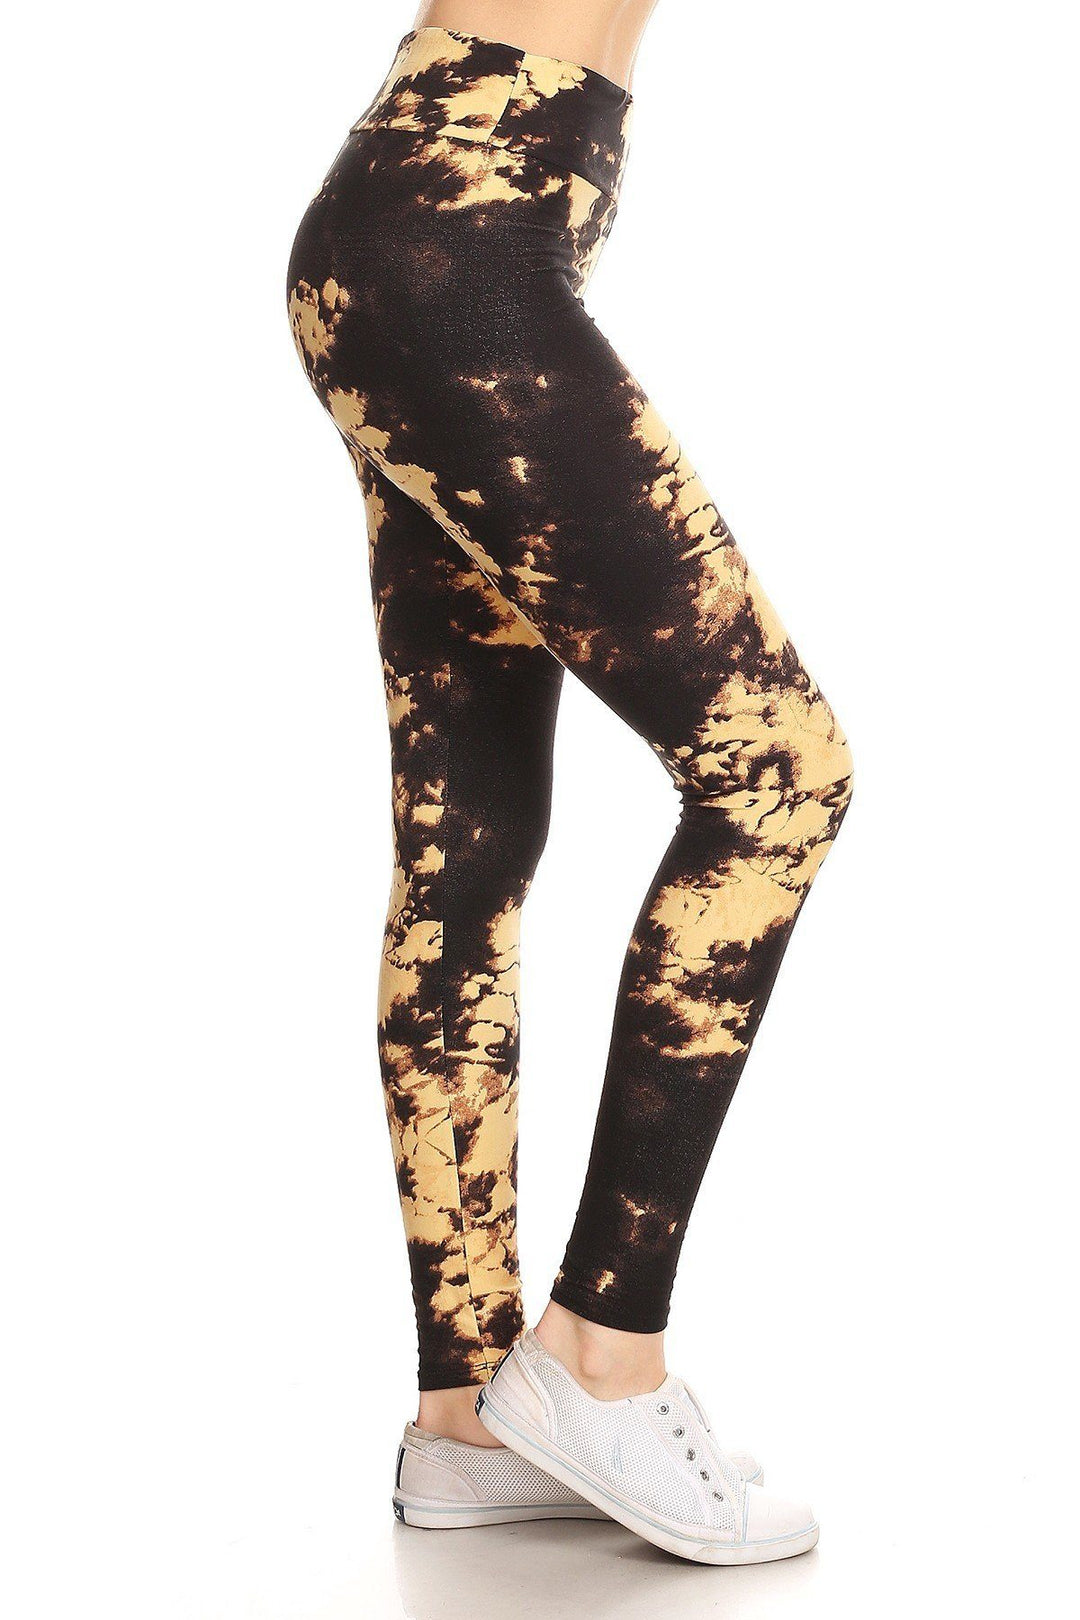 Yoga Style Banded Lined Tie Dye Print, Full Length Leggings In A Slim Fitting Style With A Banded High Waist